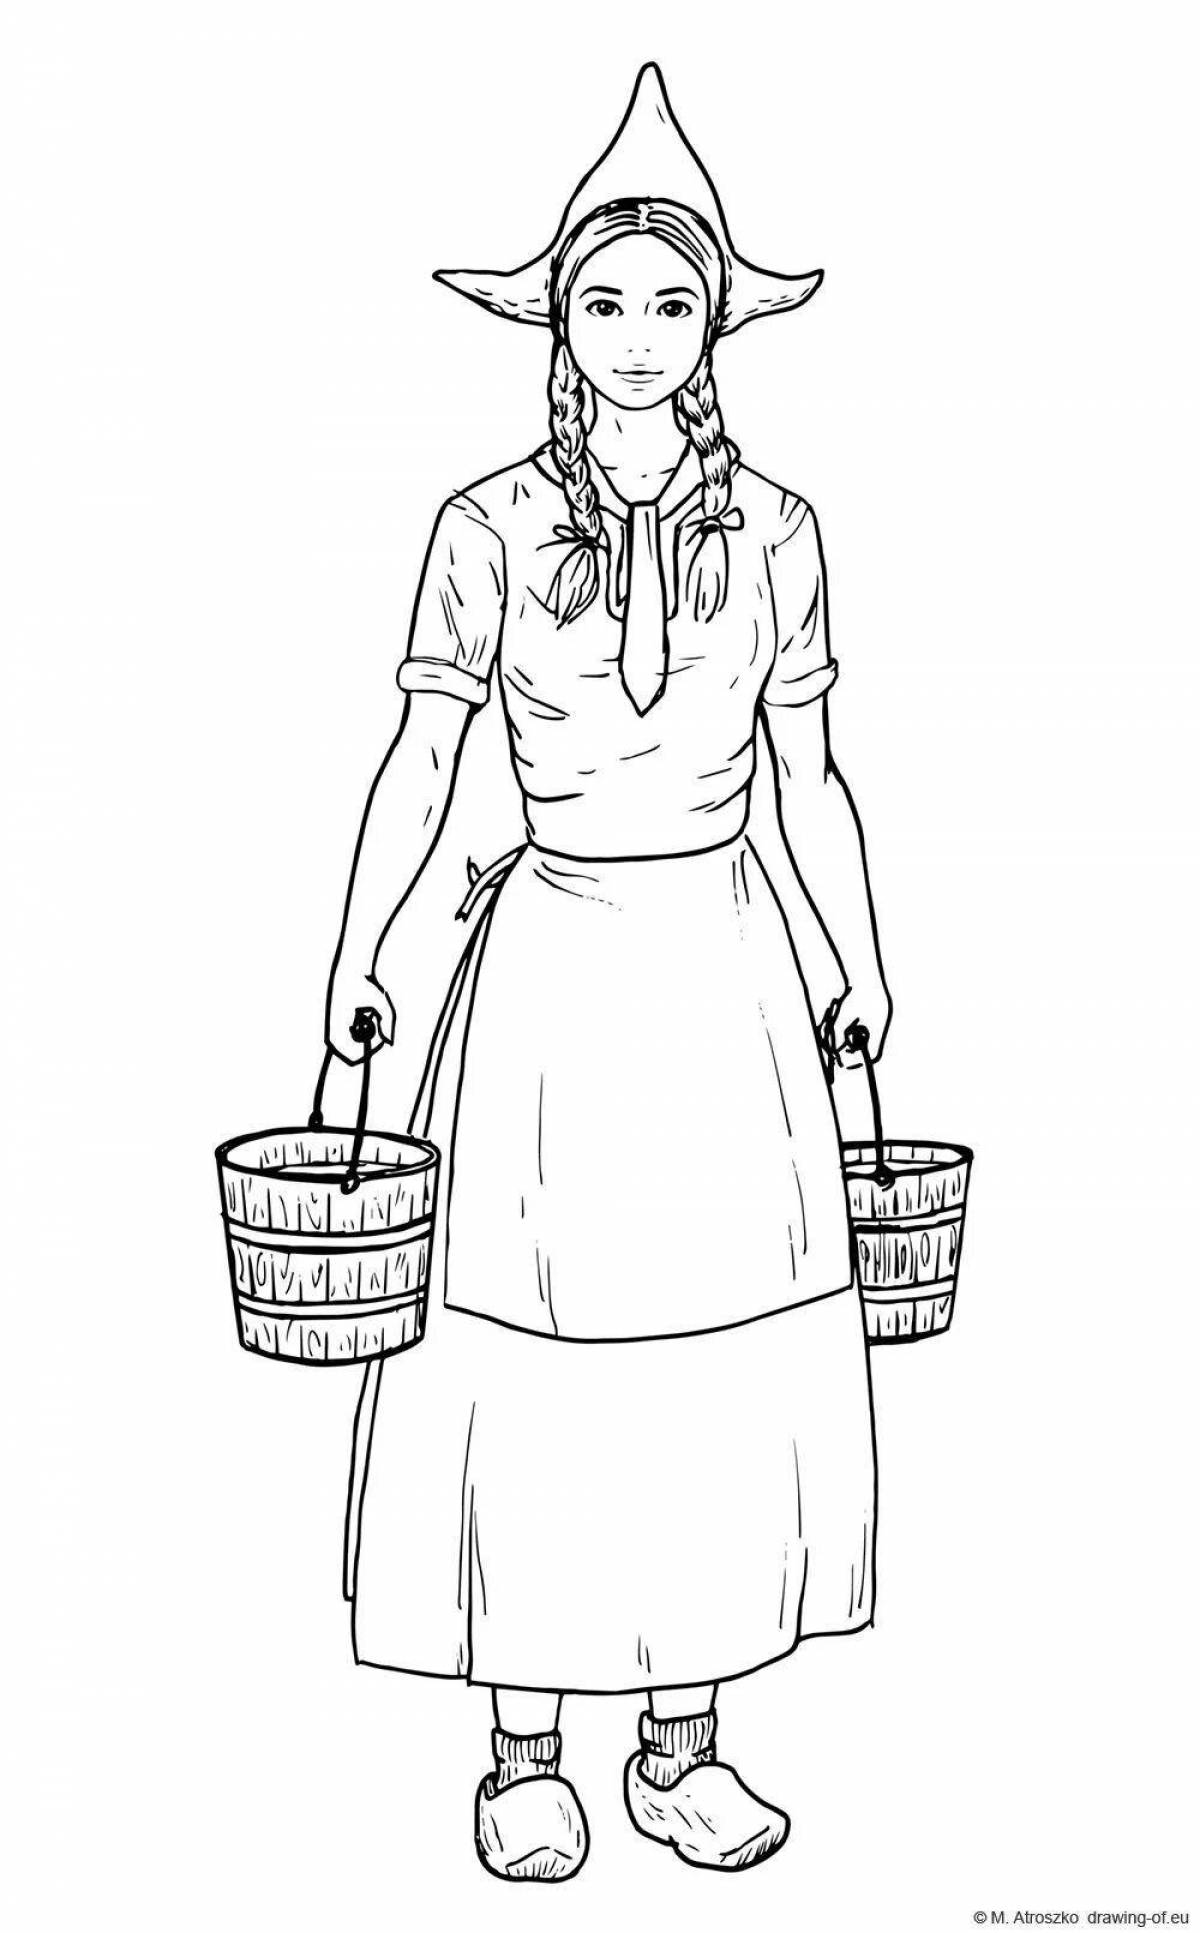 Great milkmaid coloring book